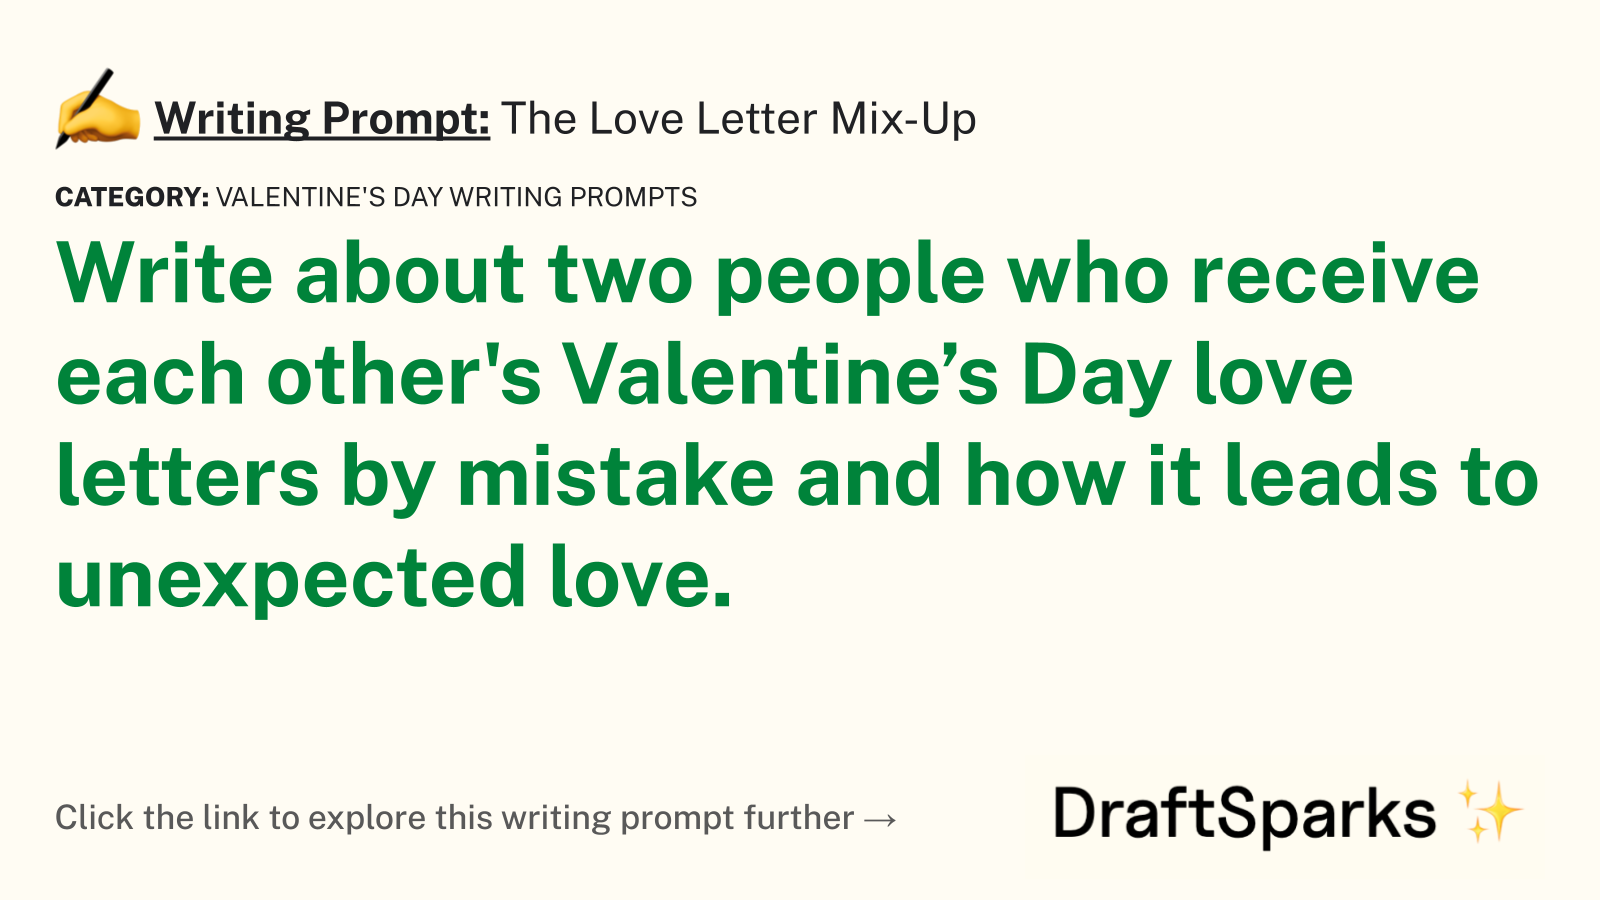 The Love Letter Mix-Up